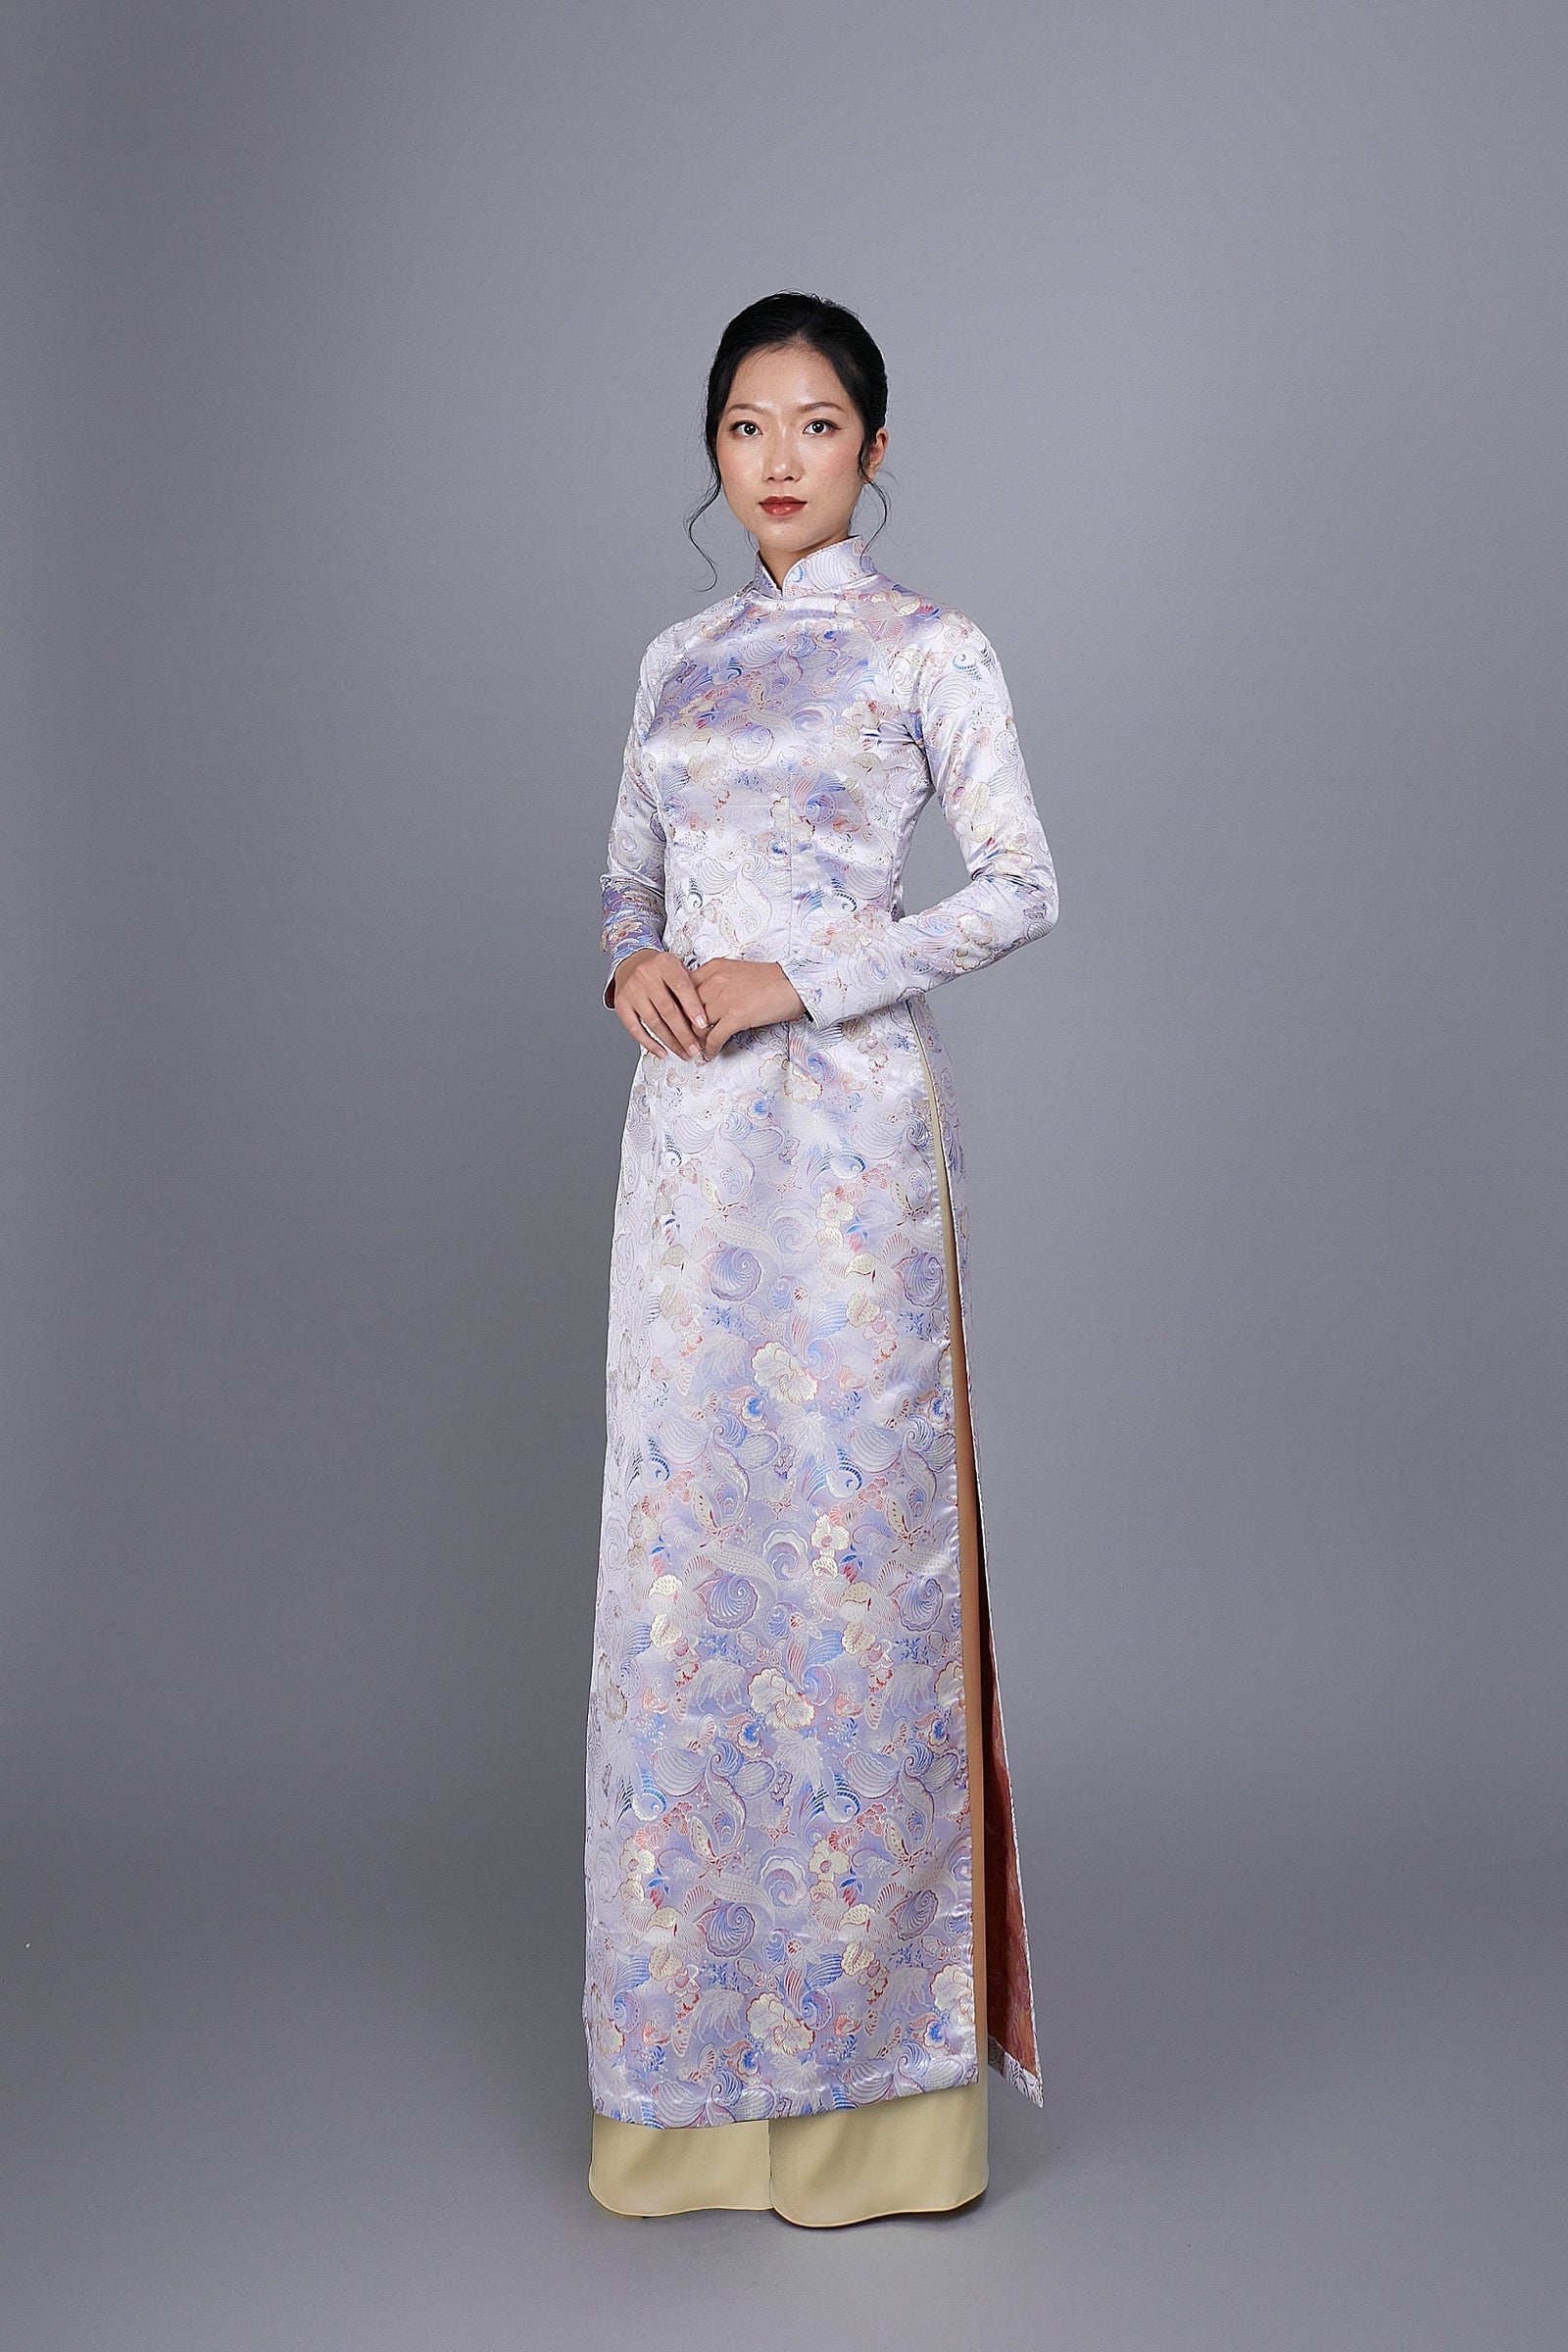 2023 Elegant Ao Dai Chinese Evening Dress Cheongsam With Oriental Flower  Print And Chiffon Perfect For Women In Vietnam From Bailanh, $34.18